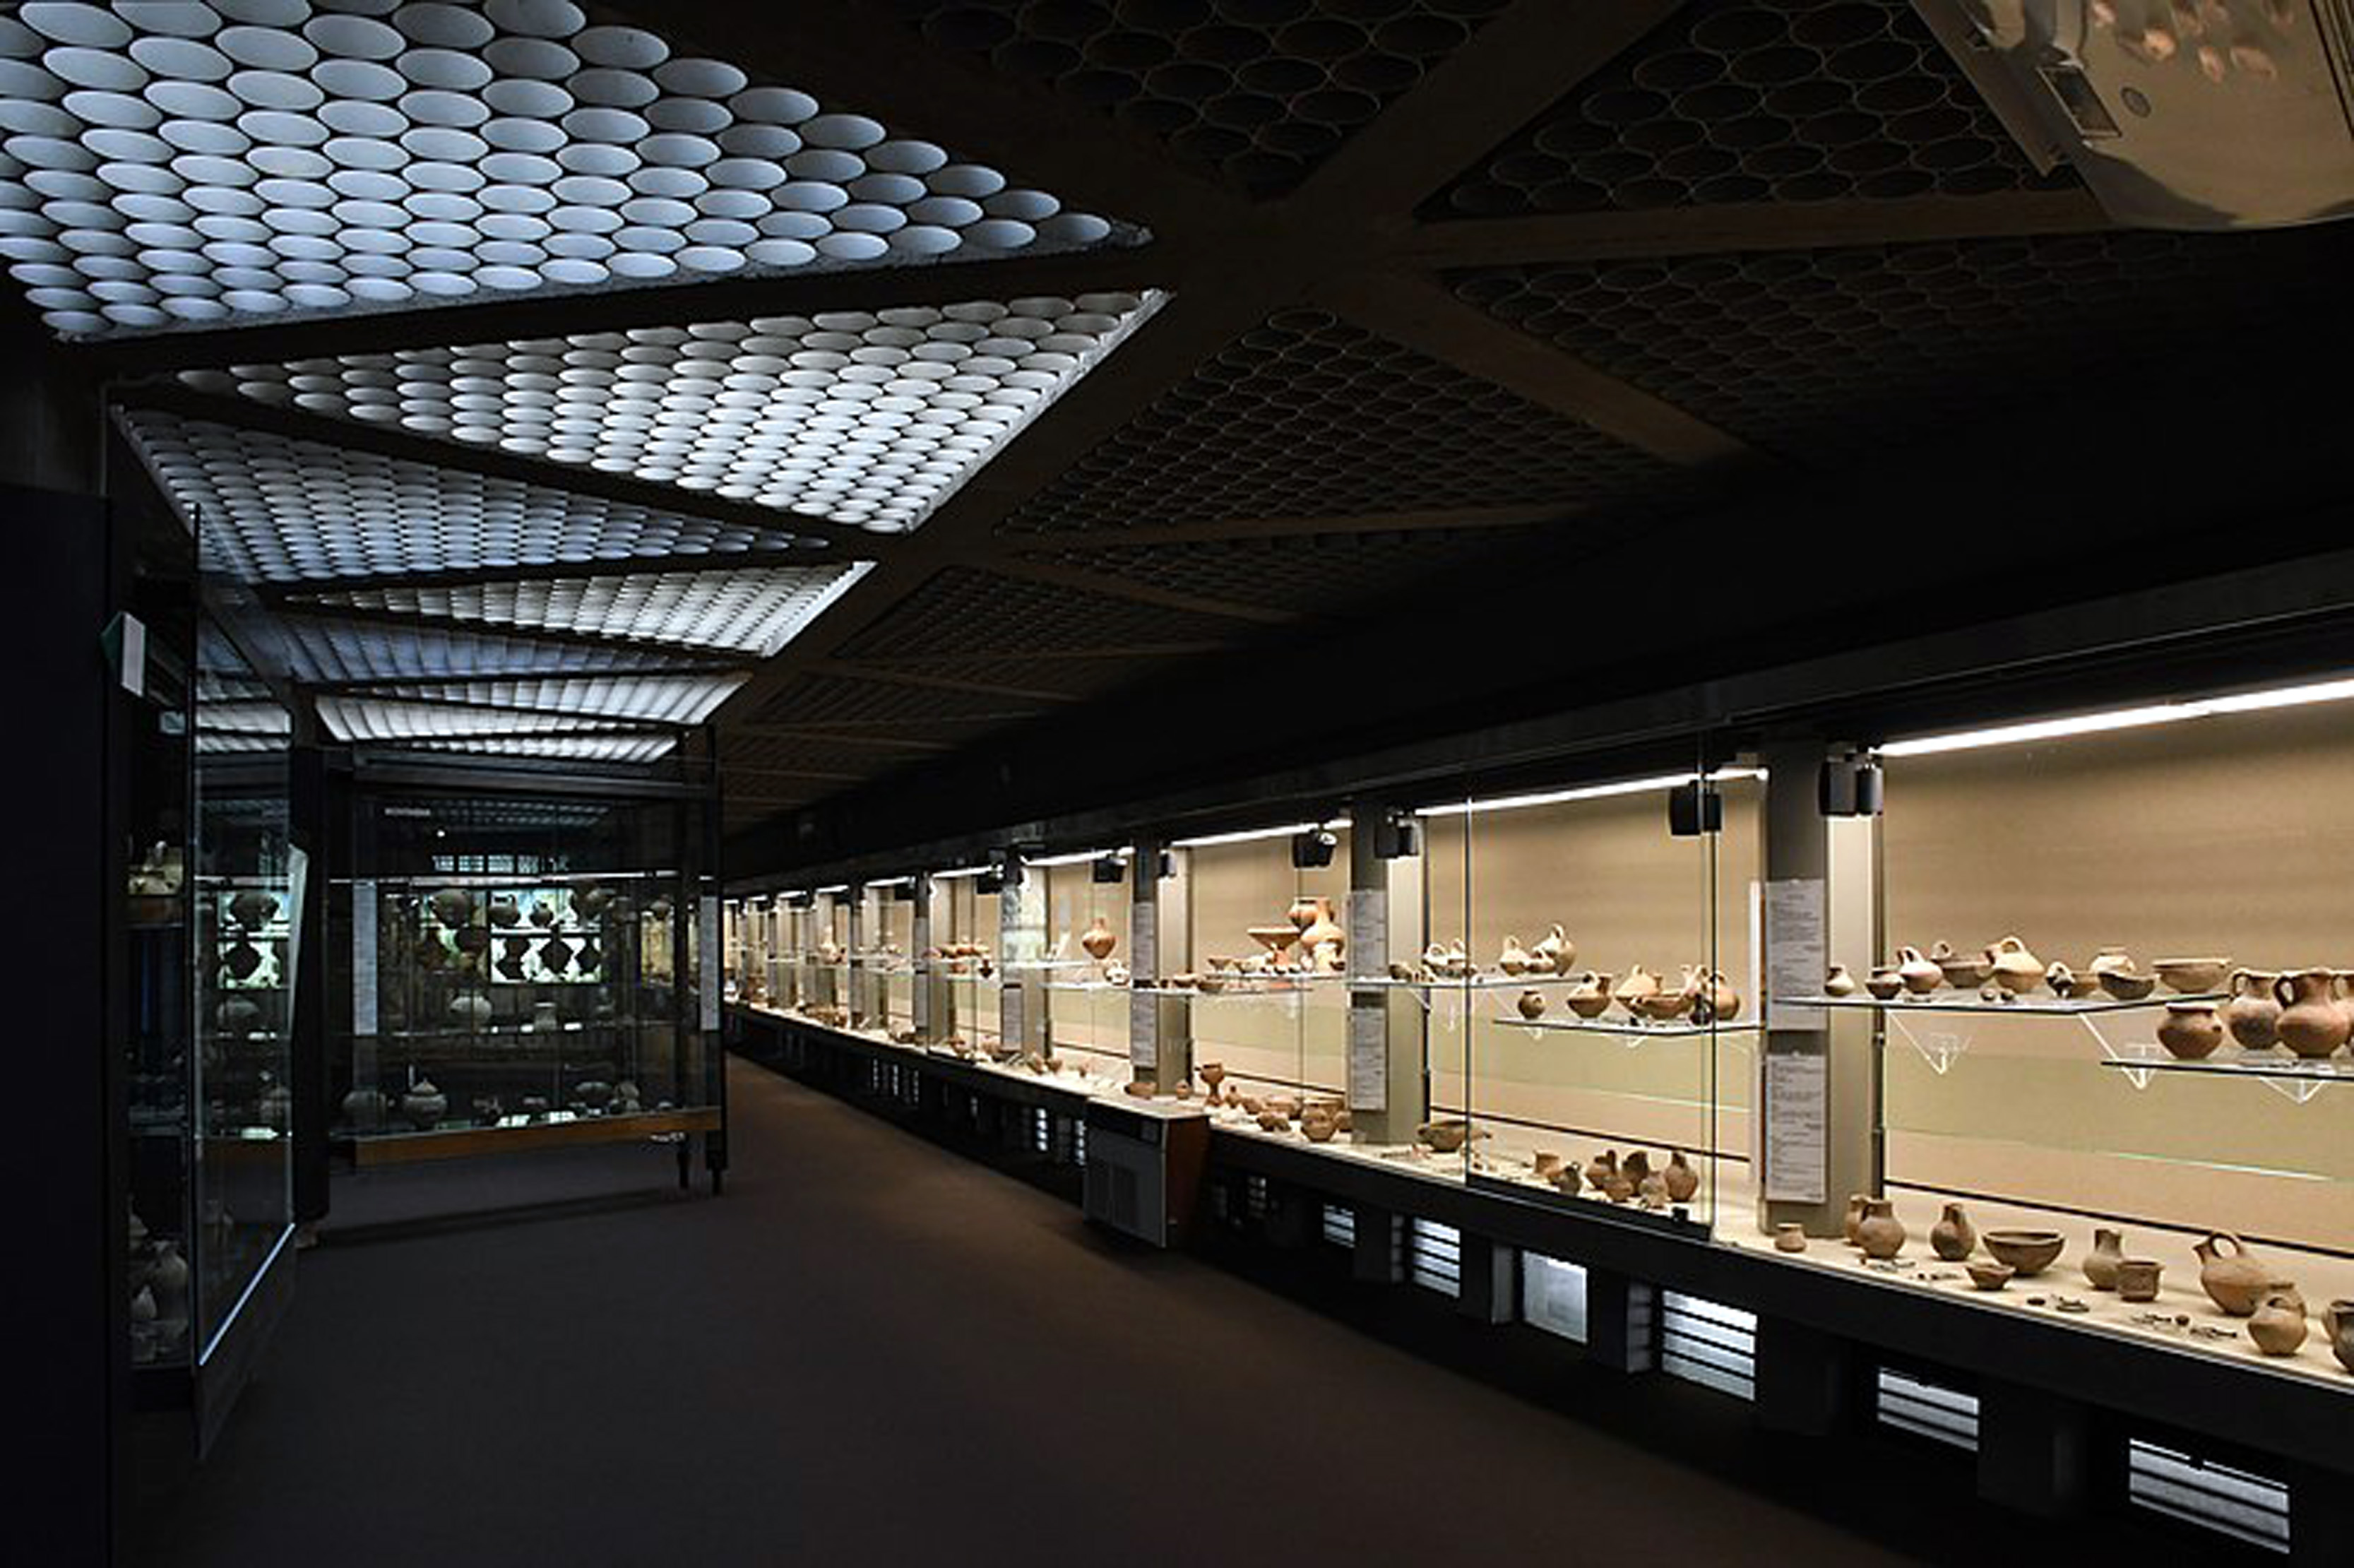 Paolo Orsi Regional Archaeological Museum, news space